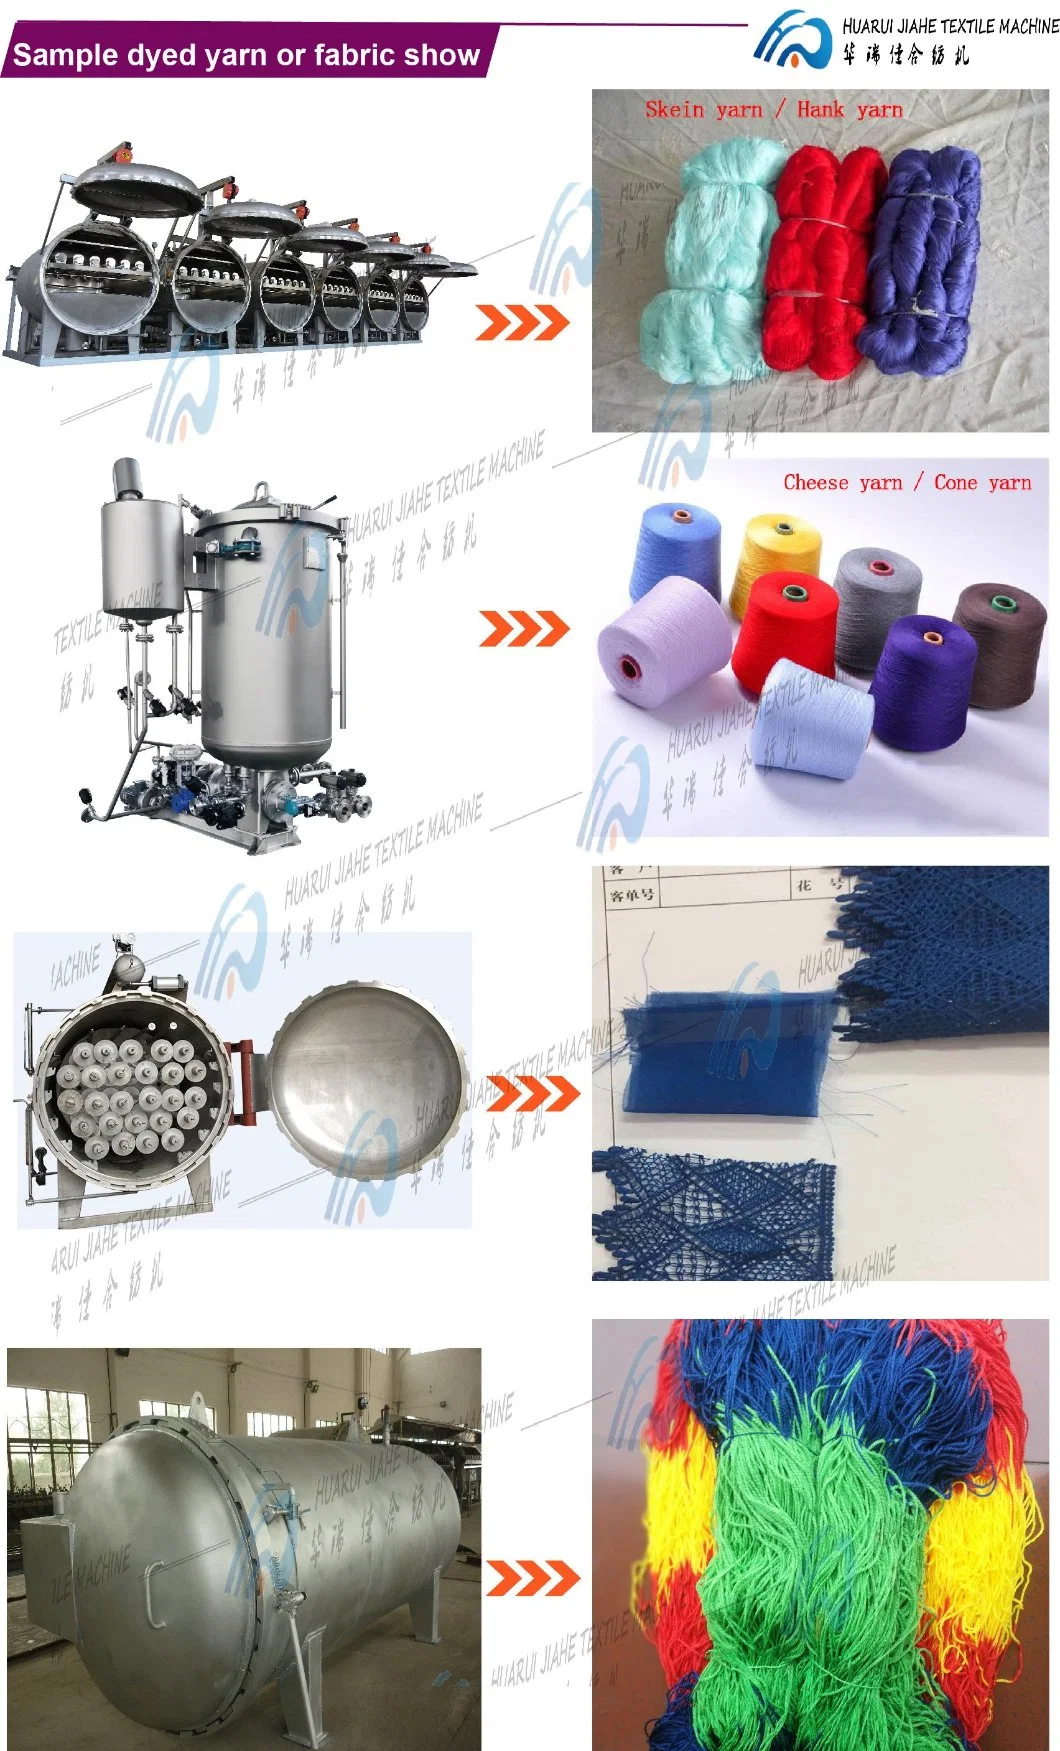 Laboratory Tube Yarn Dyeing Machines Factory Direct Sales Small Printing and Dyeing Equipment Yarn Dyeing Machine to Process Compact Spun Viscose Yarn